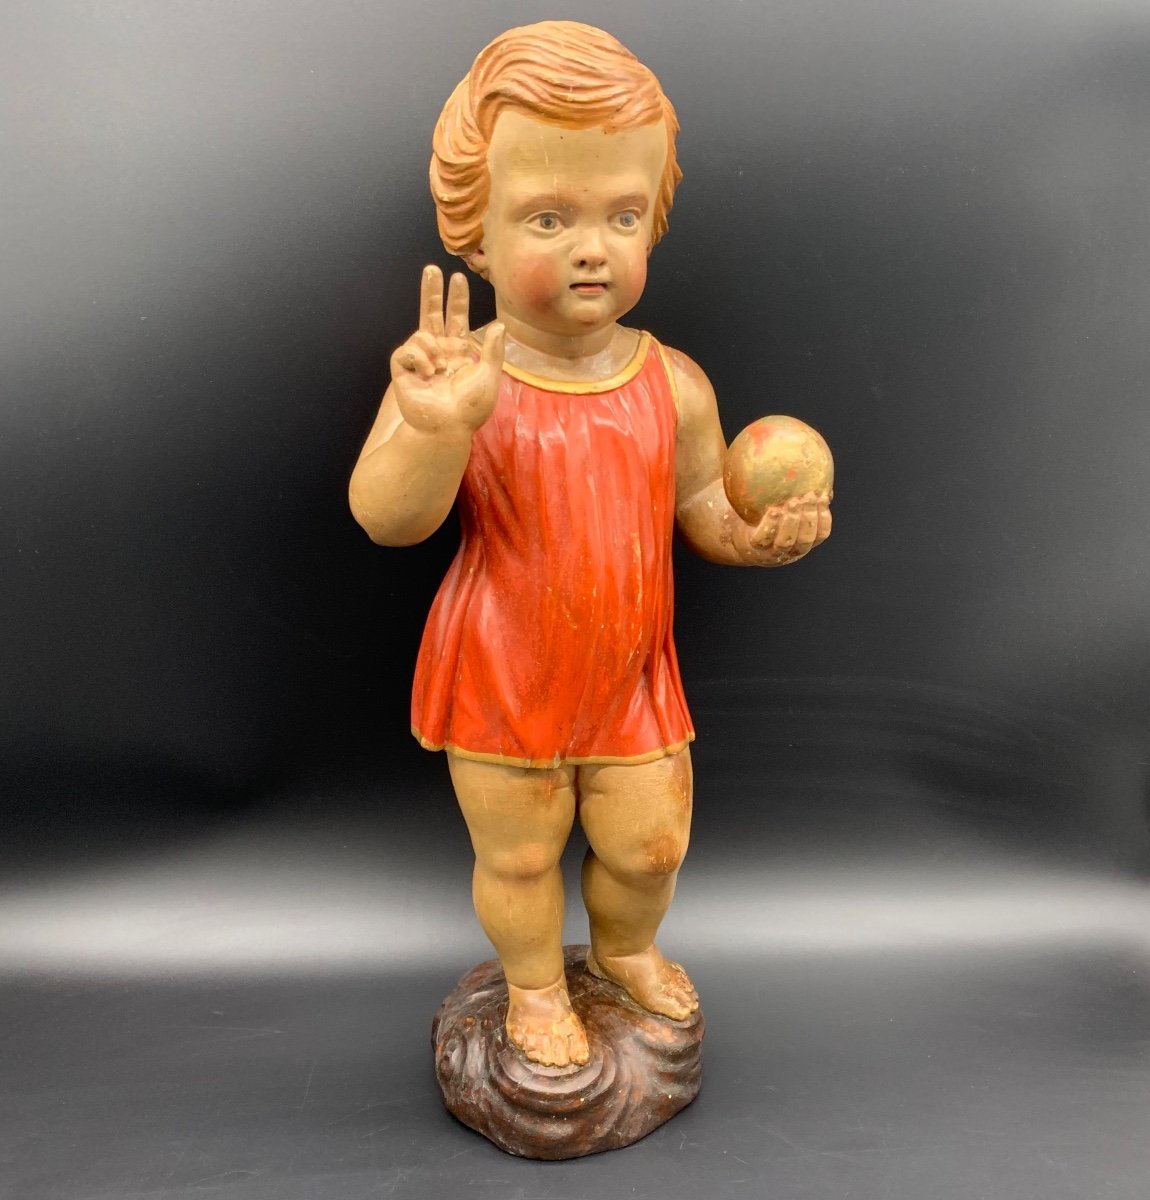 Polychrome Wooden Sculpture Depicting The Blessing Child Jesus- 19th Century